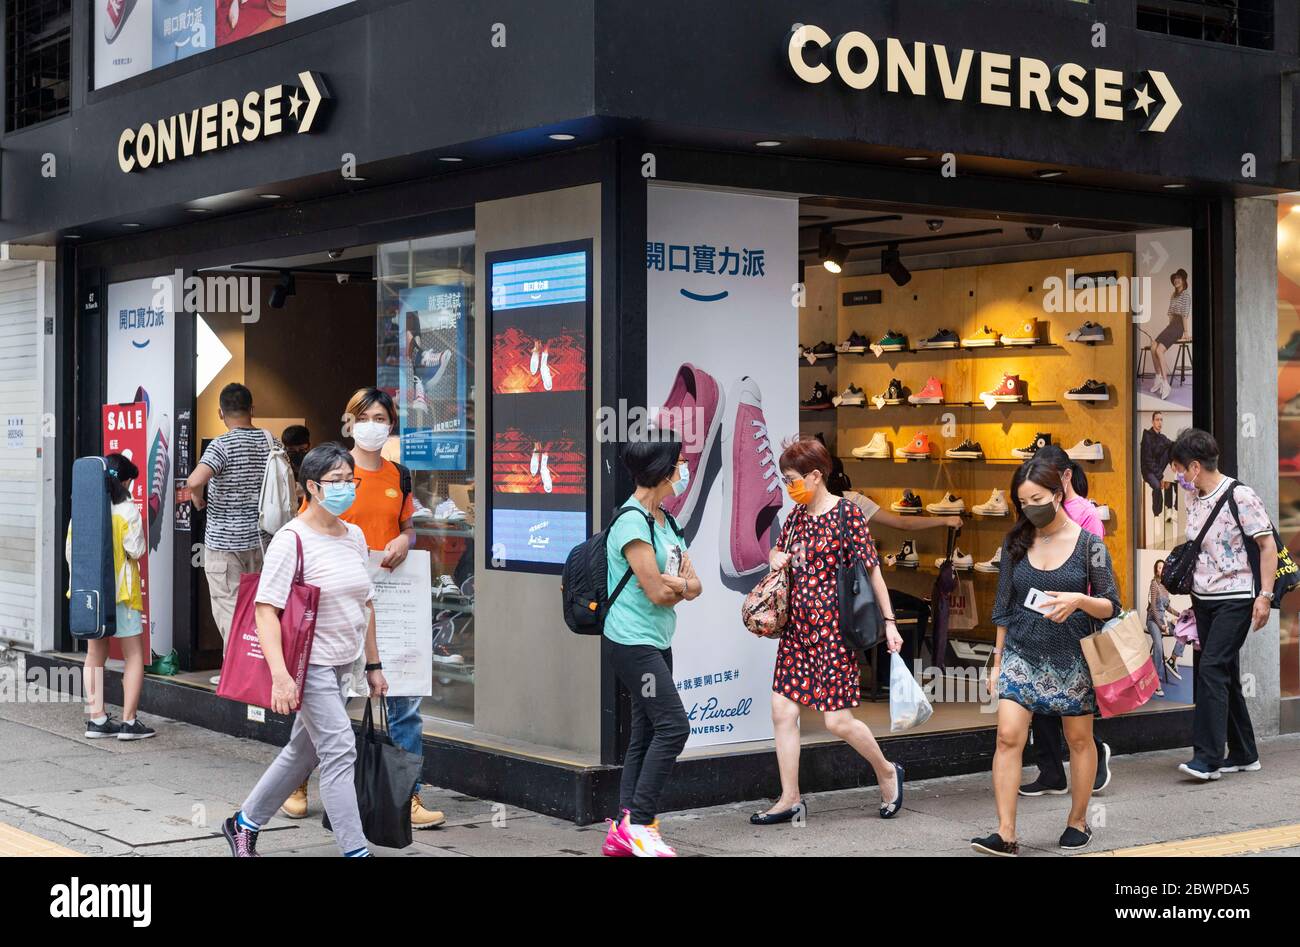 Converse Store High Resolution Stock Photography and Images - Alamy